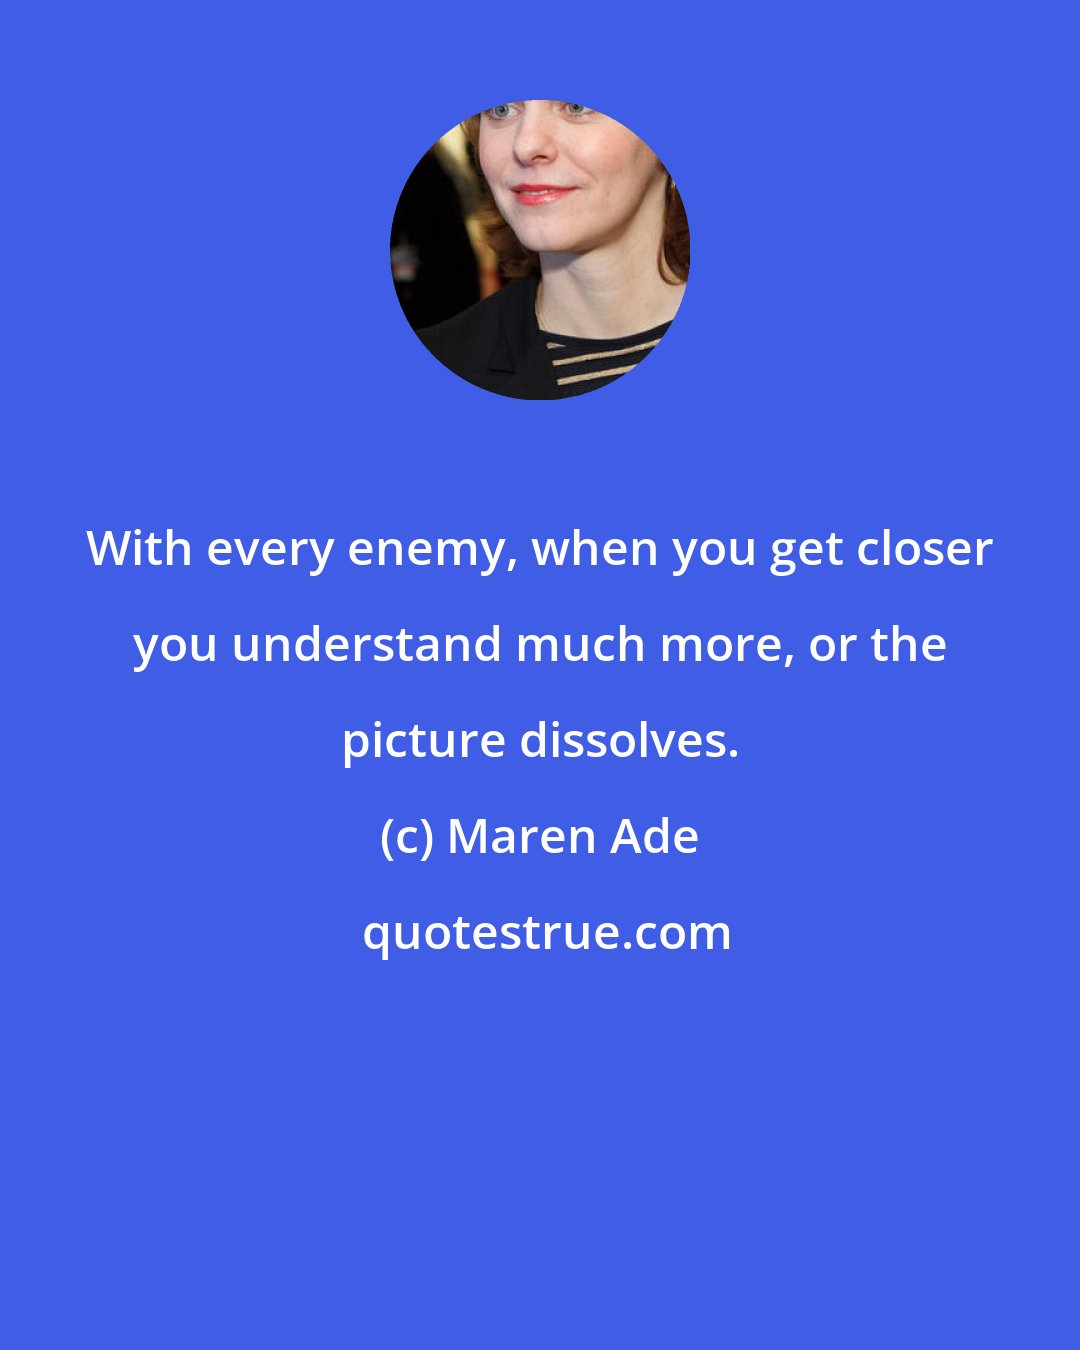 Maren Ade: With every enemy, when you get closer you understand much more, or the picture dissolves.